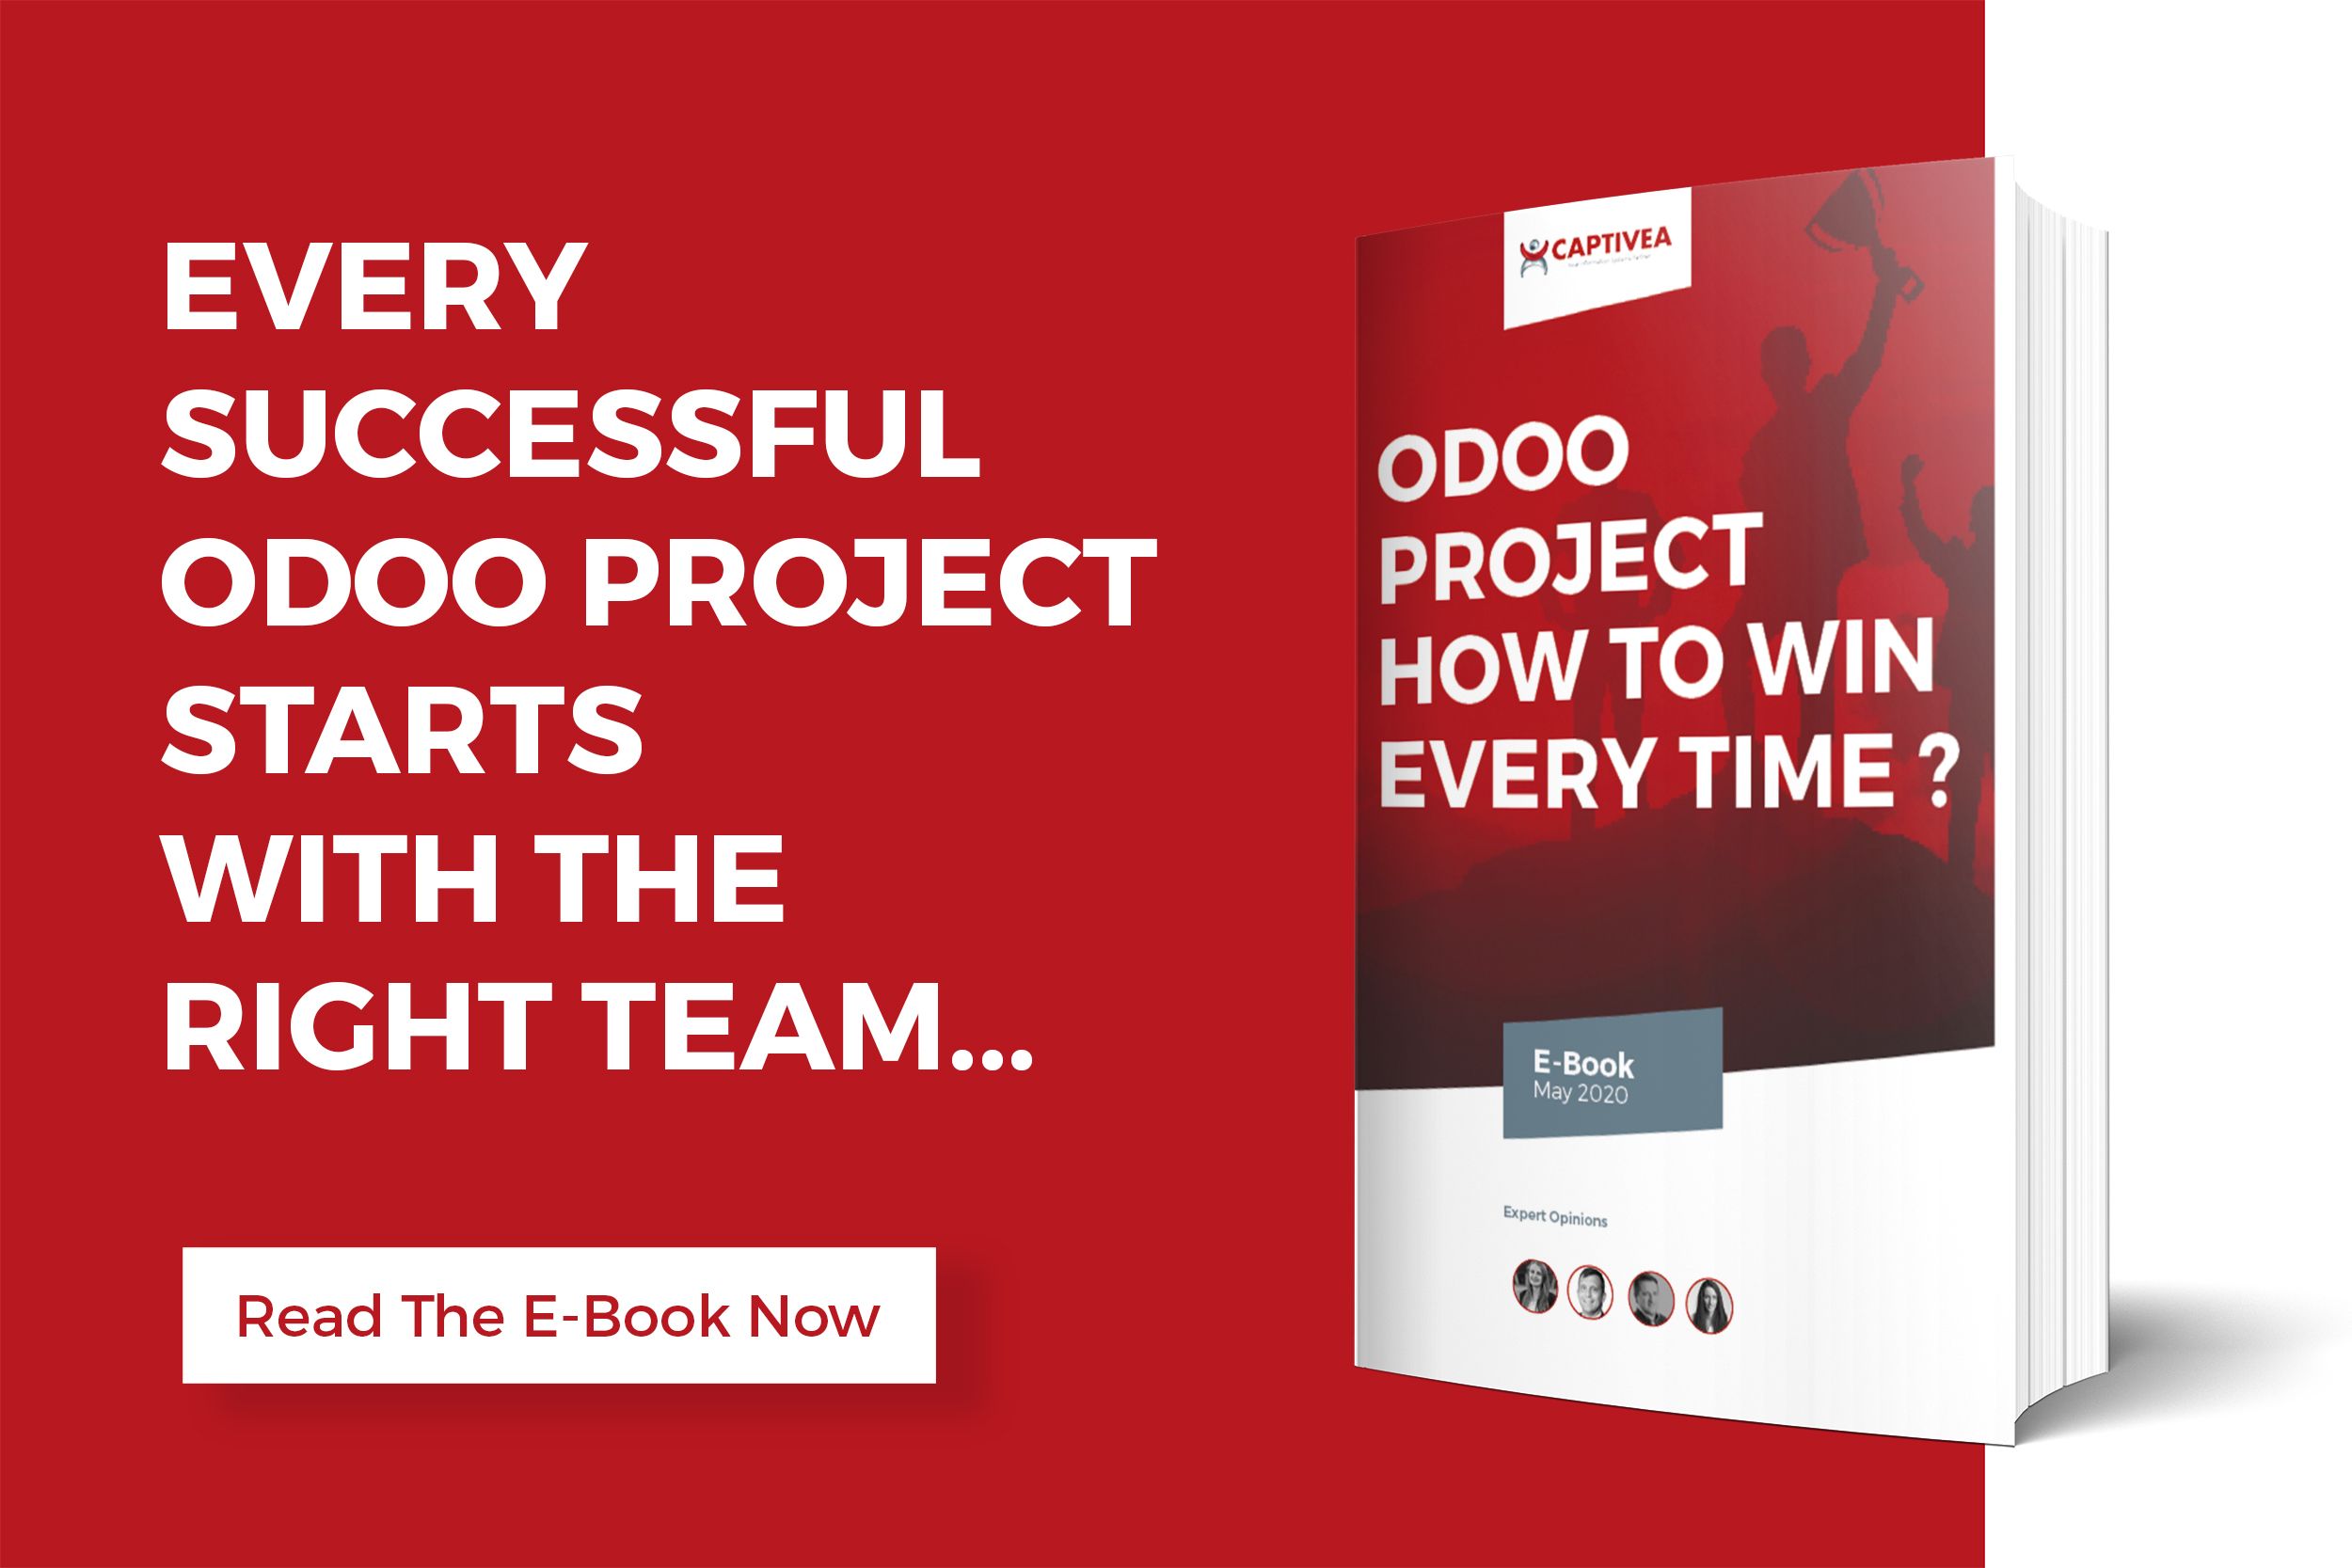 download the free ebook